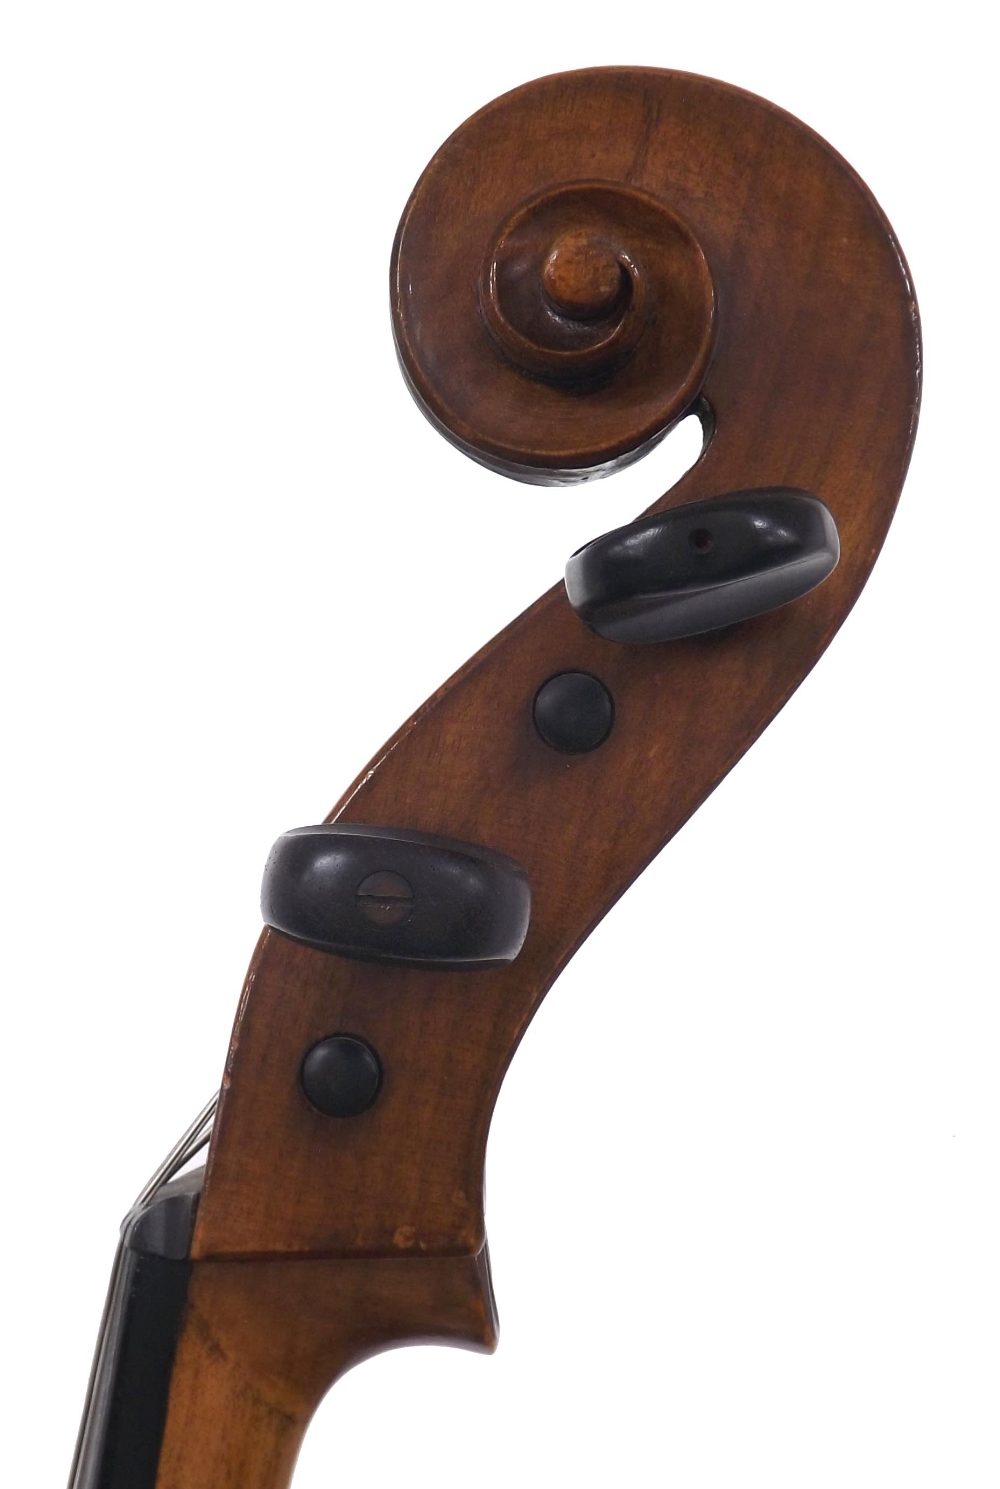 Early 20th century German violoncello, 29 7/8", 75.90cm, hard case and two nickel mounted - Image 3 of 3